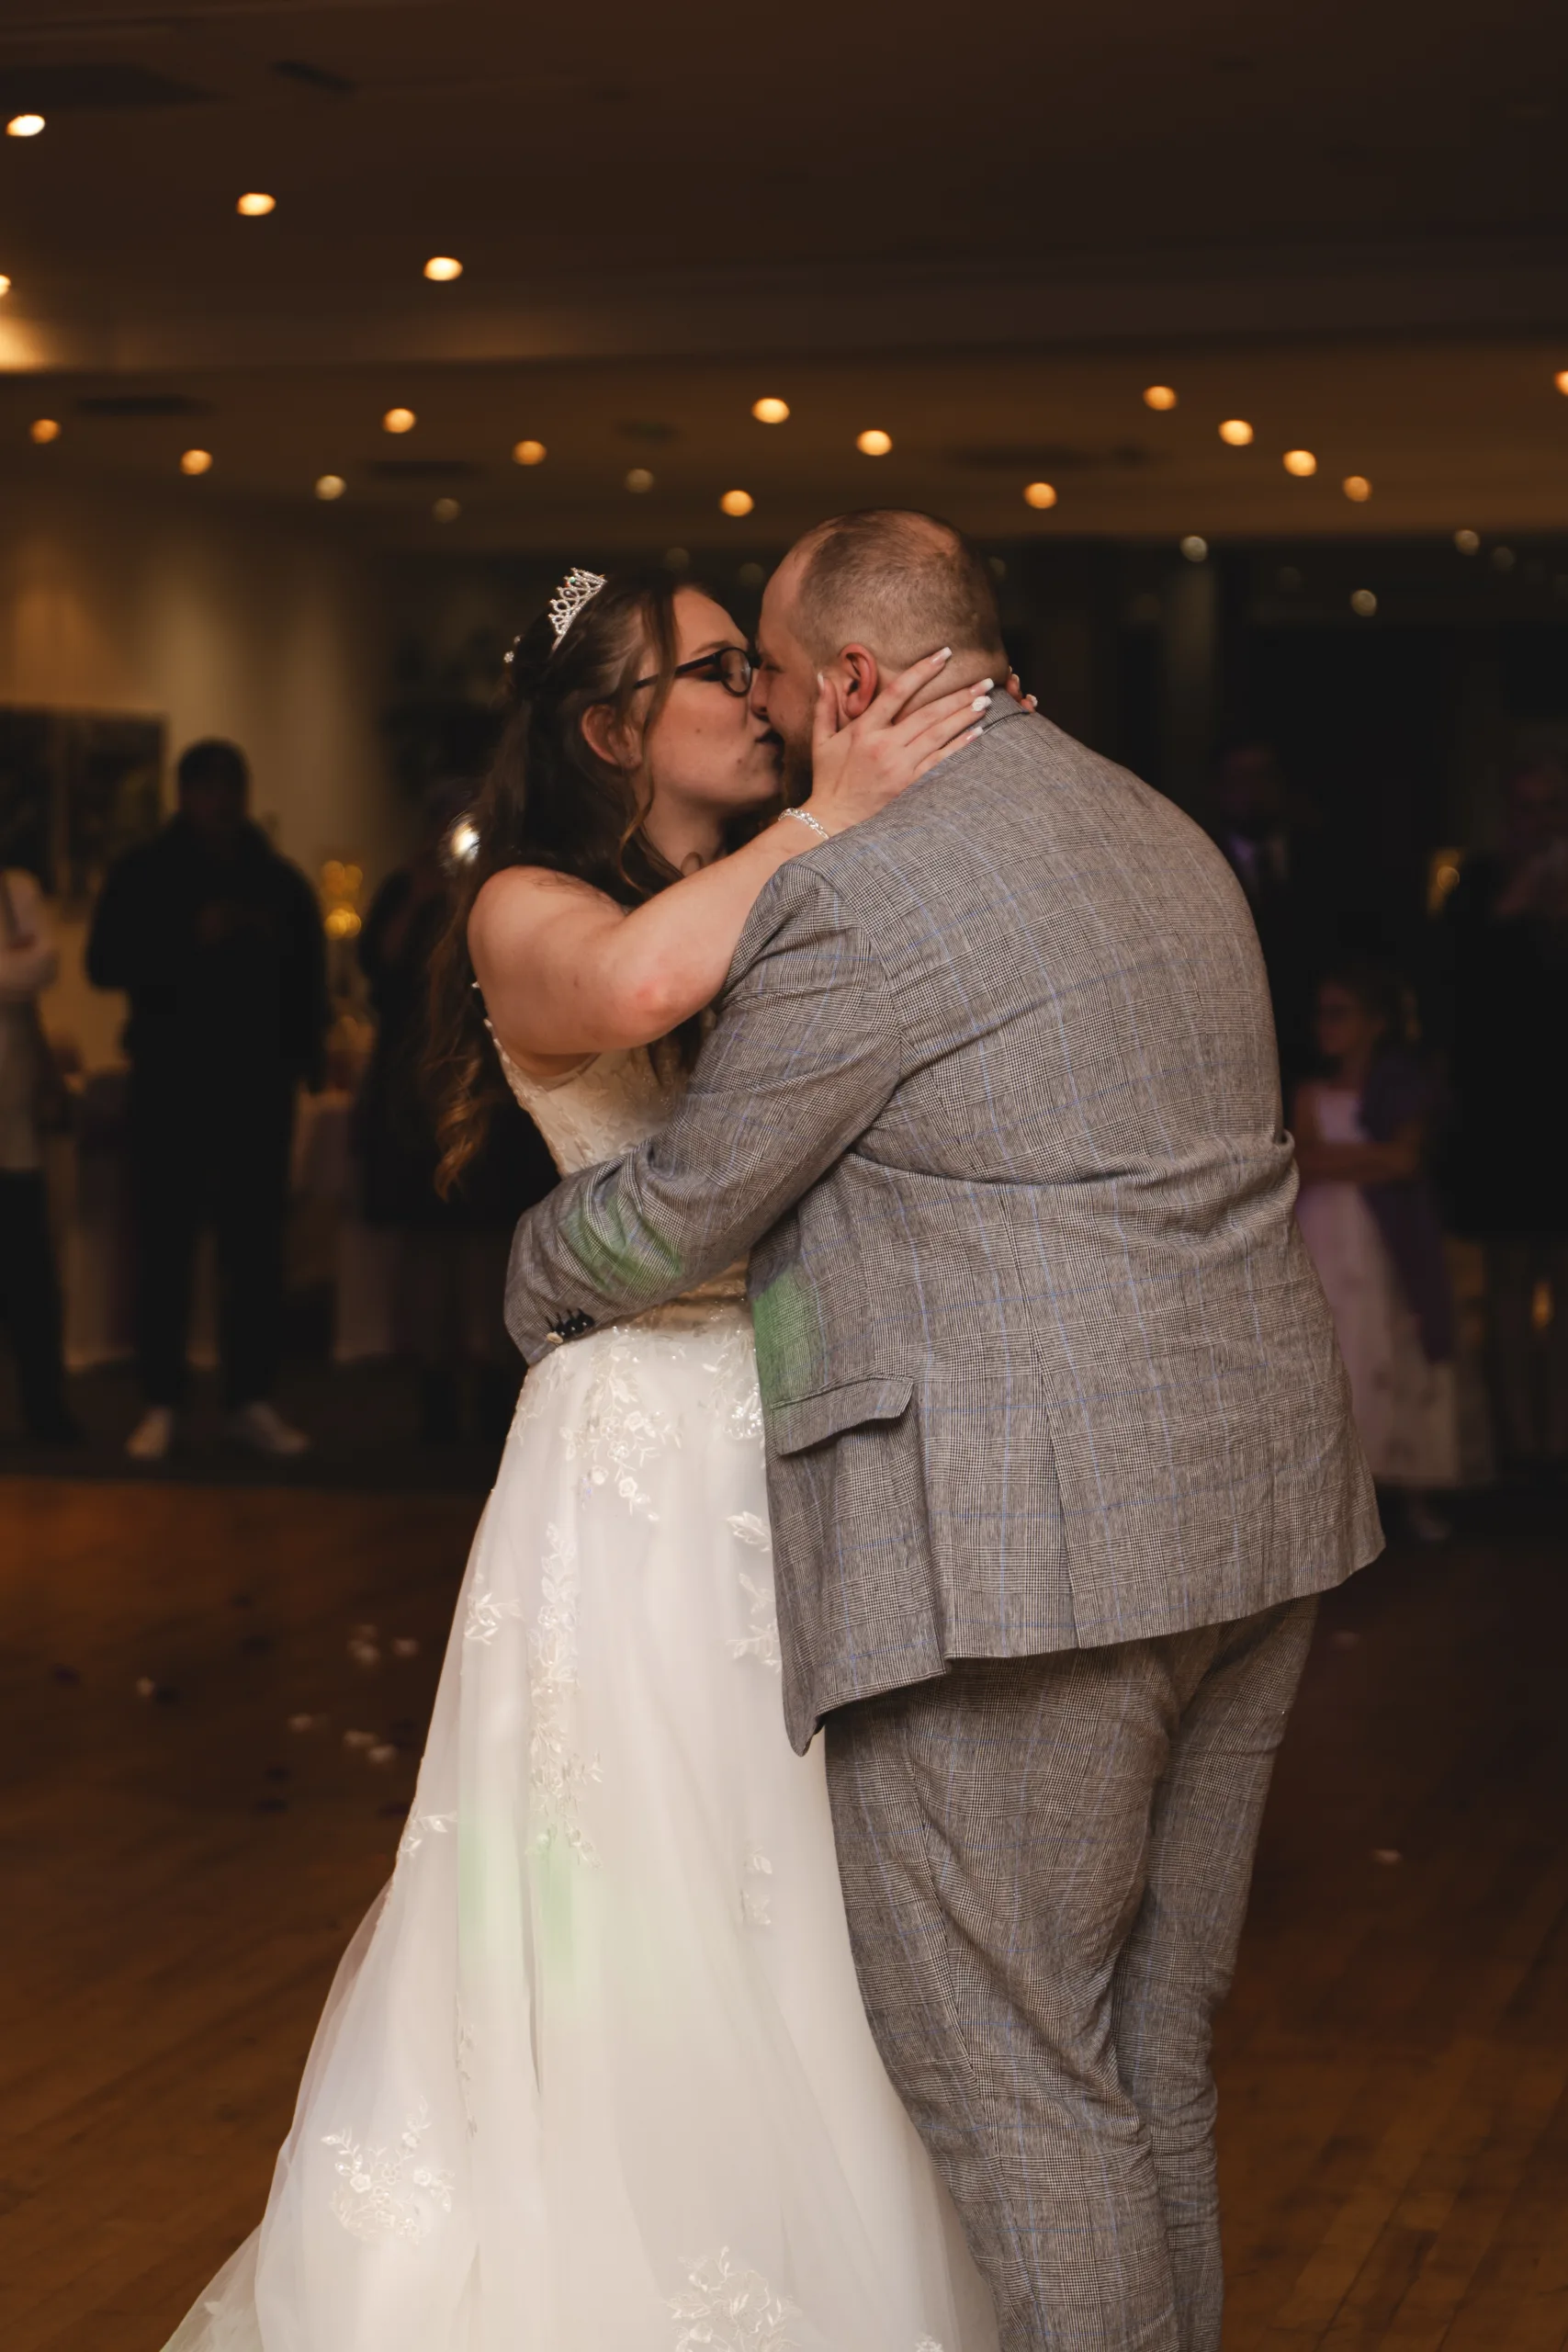 A bride and groom sharing their first dance at The Humber Royal Hotel wedding reception.